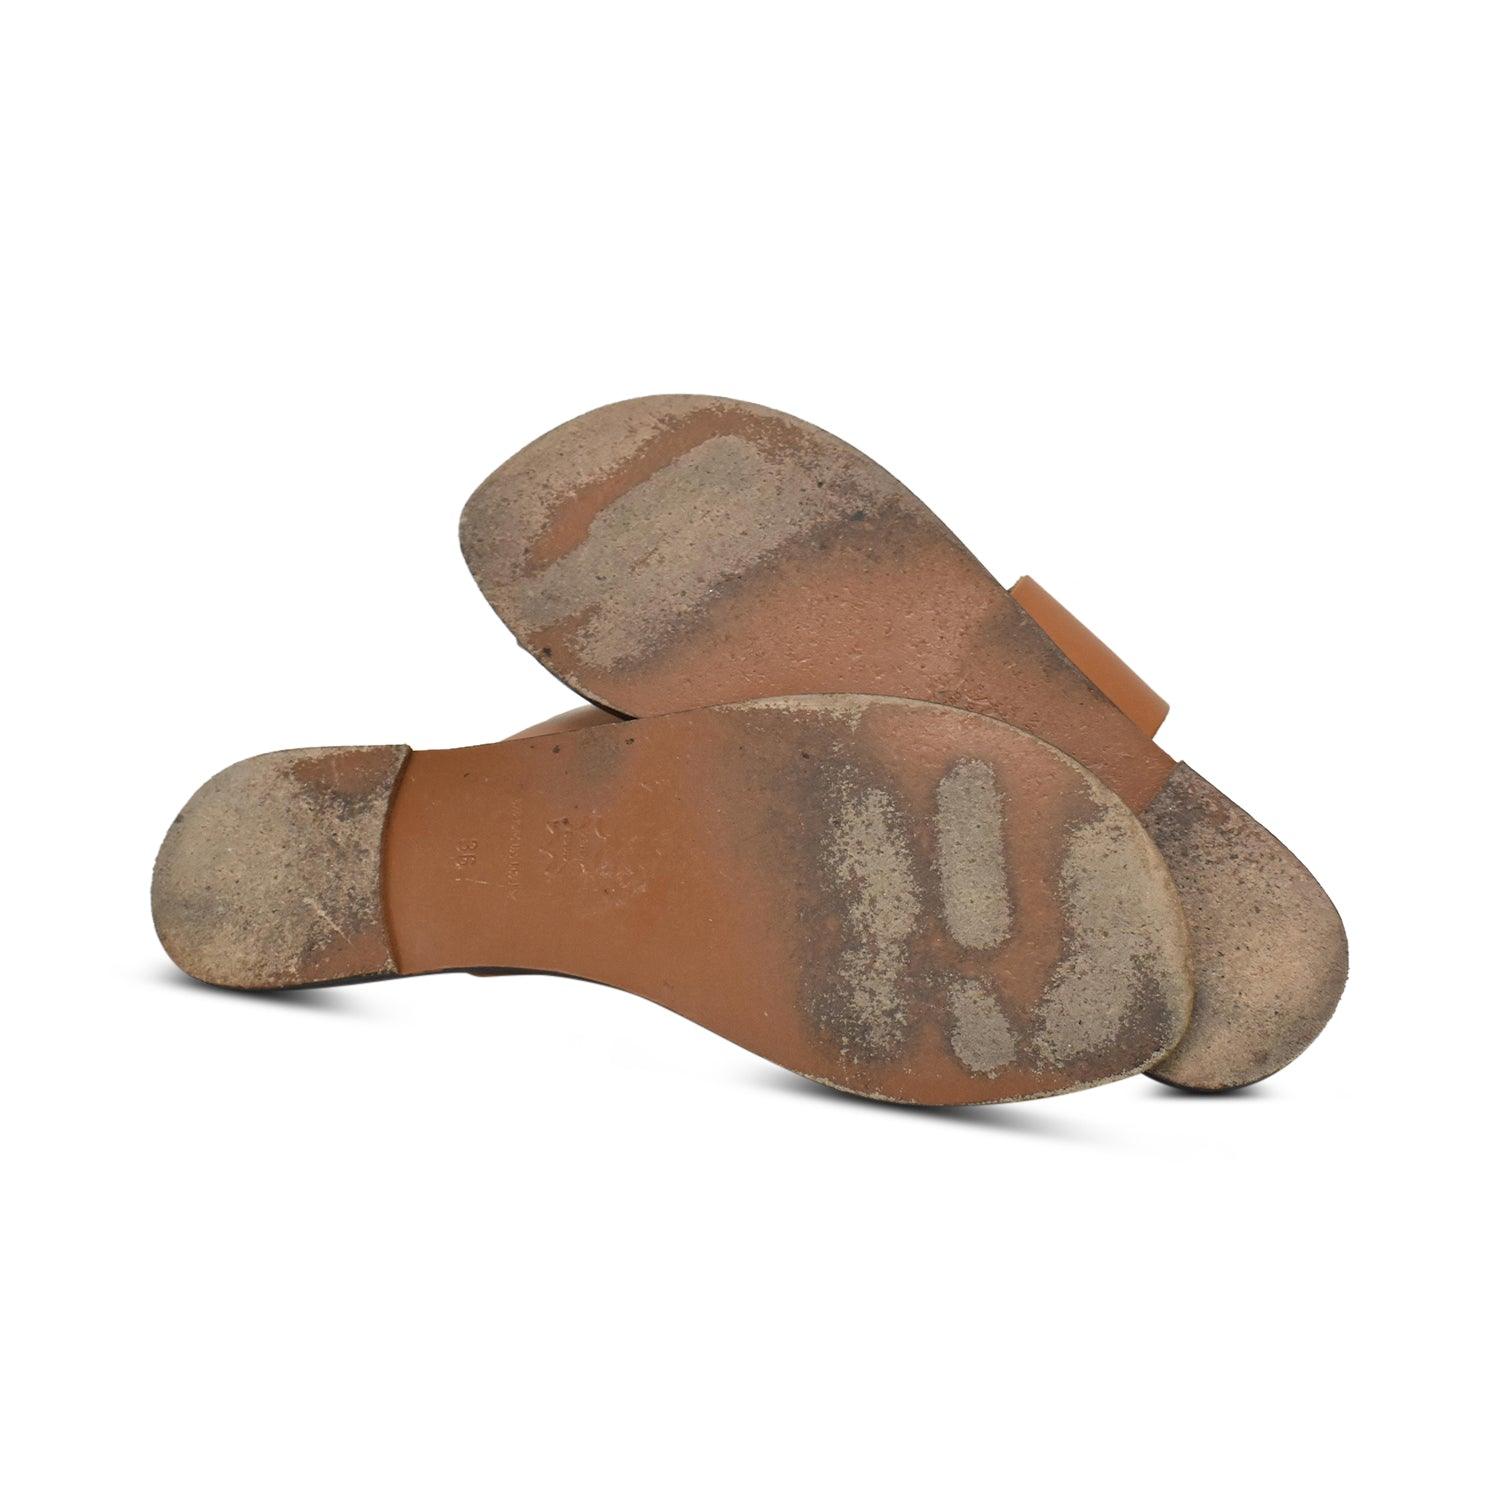 ATP Sandals - Women's 36 - Fashionably Yours